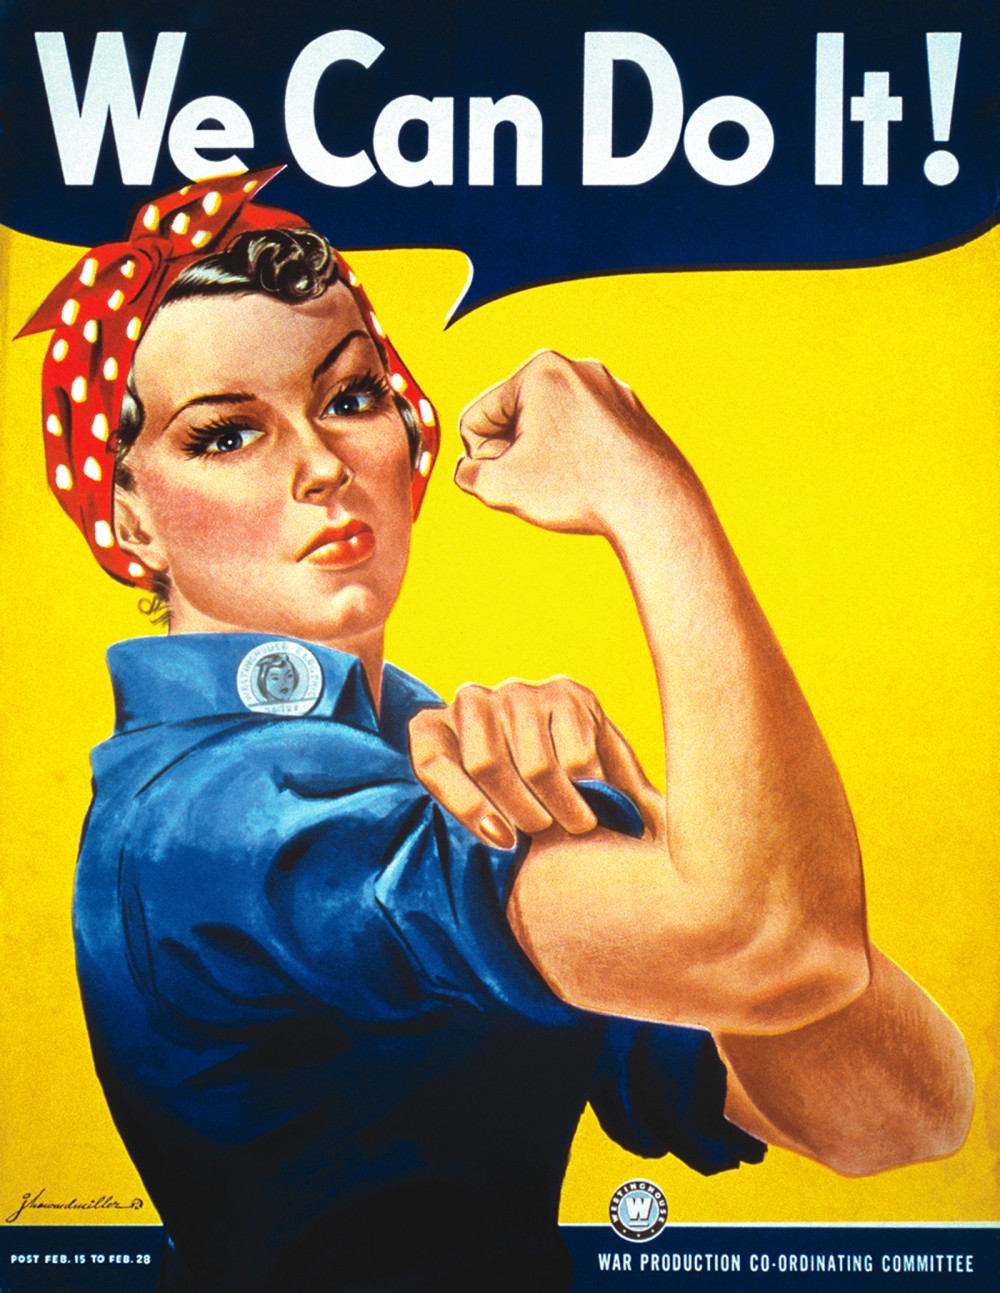 Women came into the workforces in greater numbers than ever before during WWII. With vacancies left by deployed men and new positions created by war production, posters like this iconic “We Can Do It!” urged women to support the war effort by going to work in America’s factories. Poster for Westinghouse, 1942. Wikimedia, http://commons.wikimedia.org/wiki/File:We_Can_Do_It!.jpg.